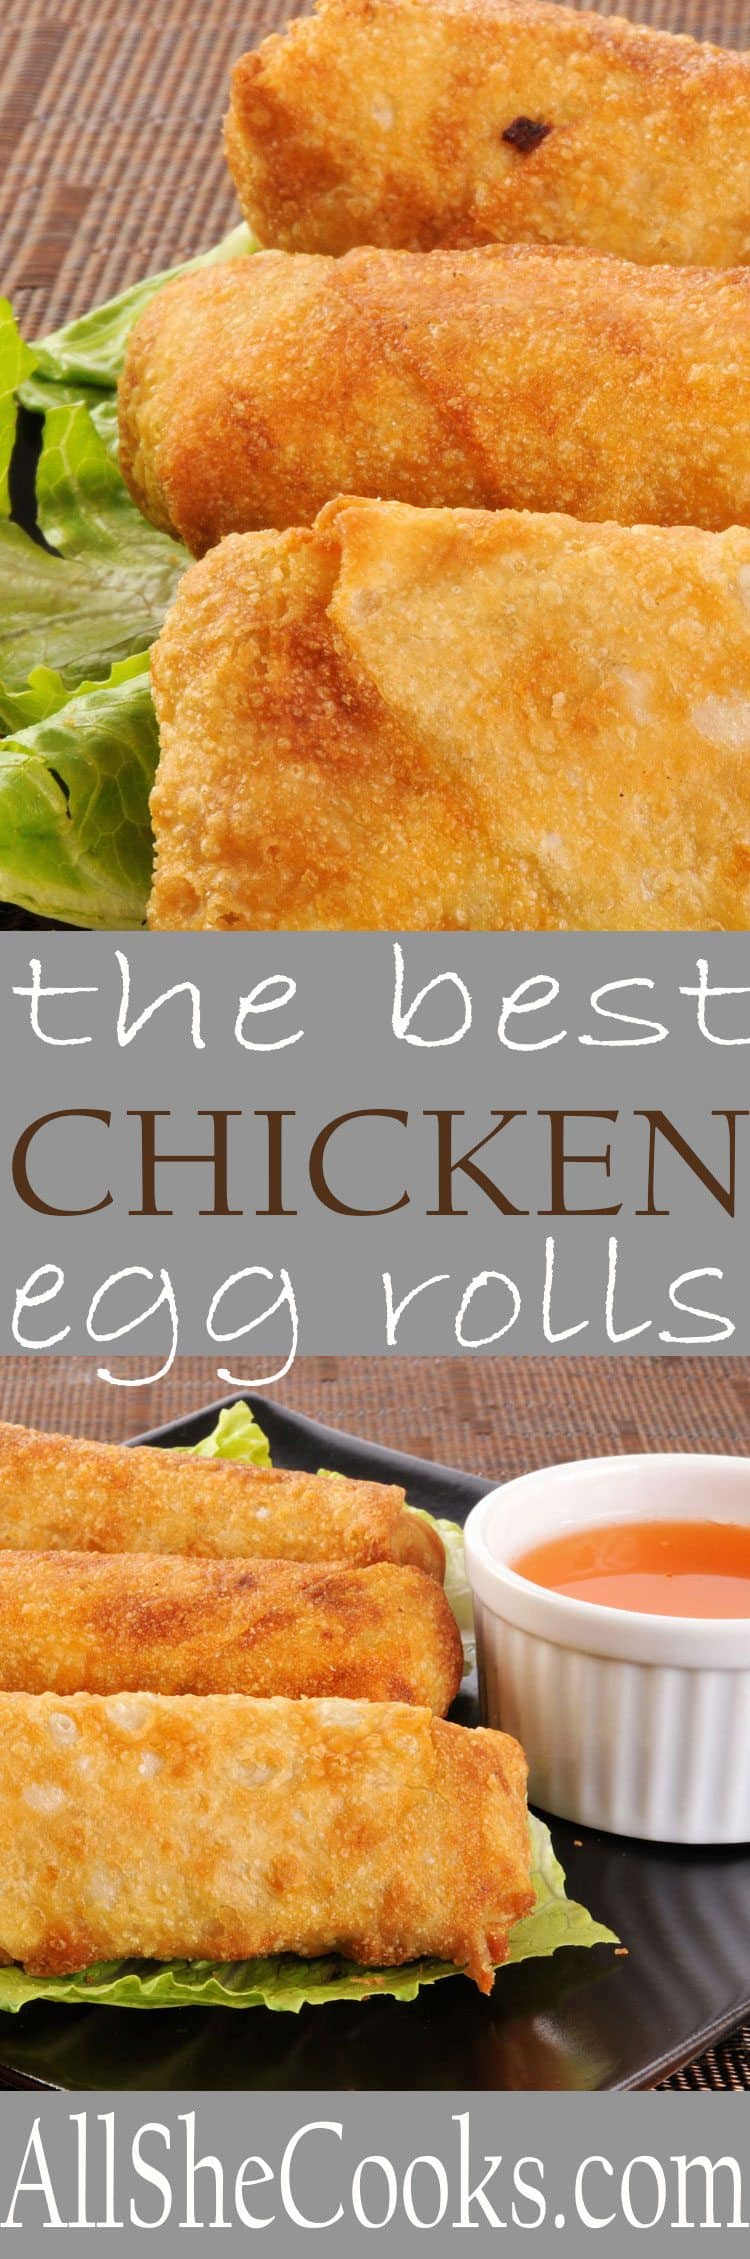 Make egg rolls with this homemade egg rolls recipe fro a healthy and tasty appetizer or meal. Fried or baked, egg rolls add a unique flavor to your meal.